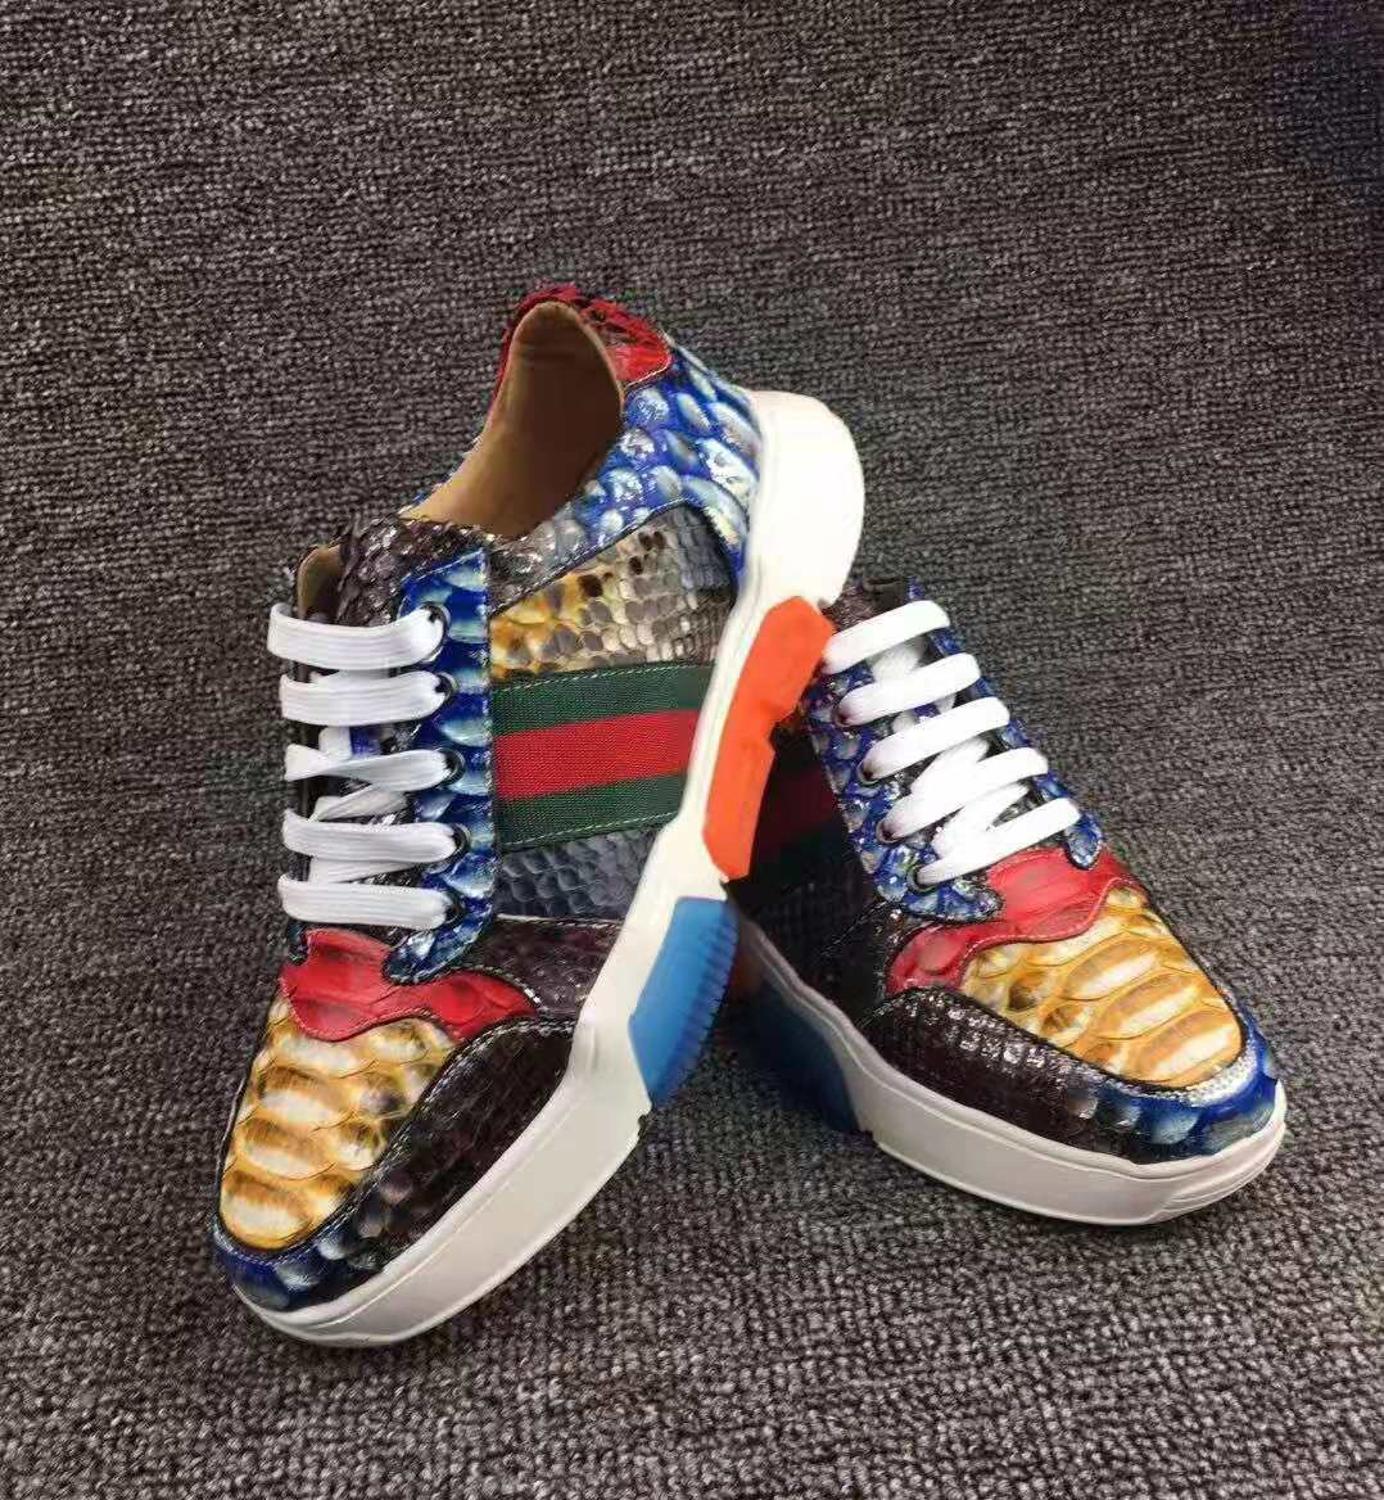 2019 newly design Genuine real genuine python skin shoe high end quality colorful snake skin sneaker with cow skin lining